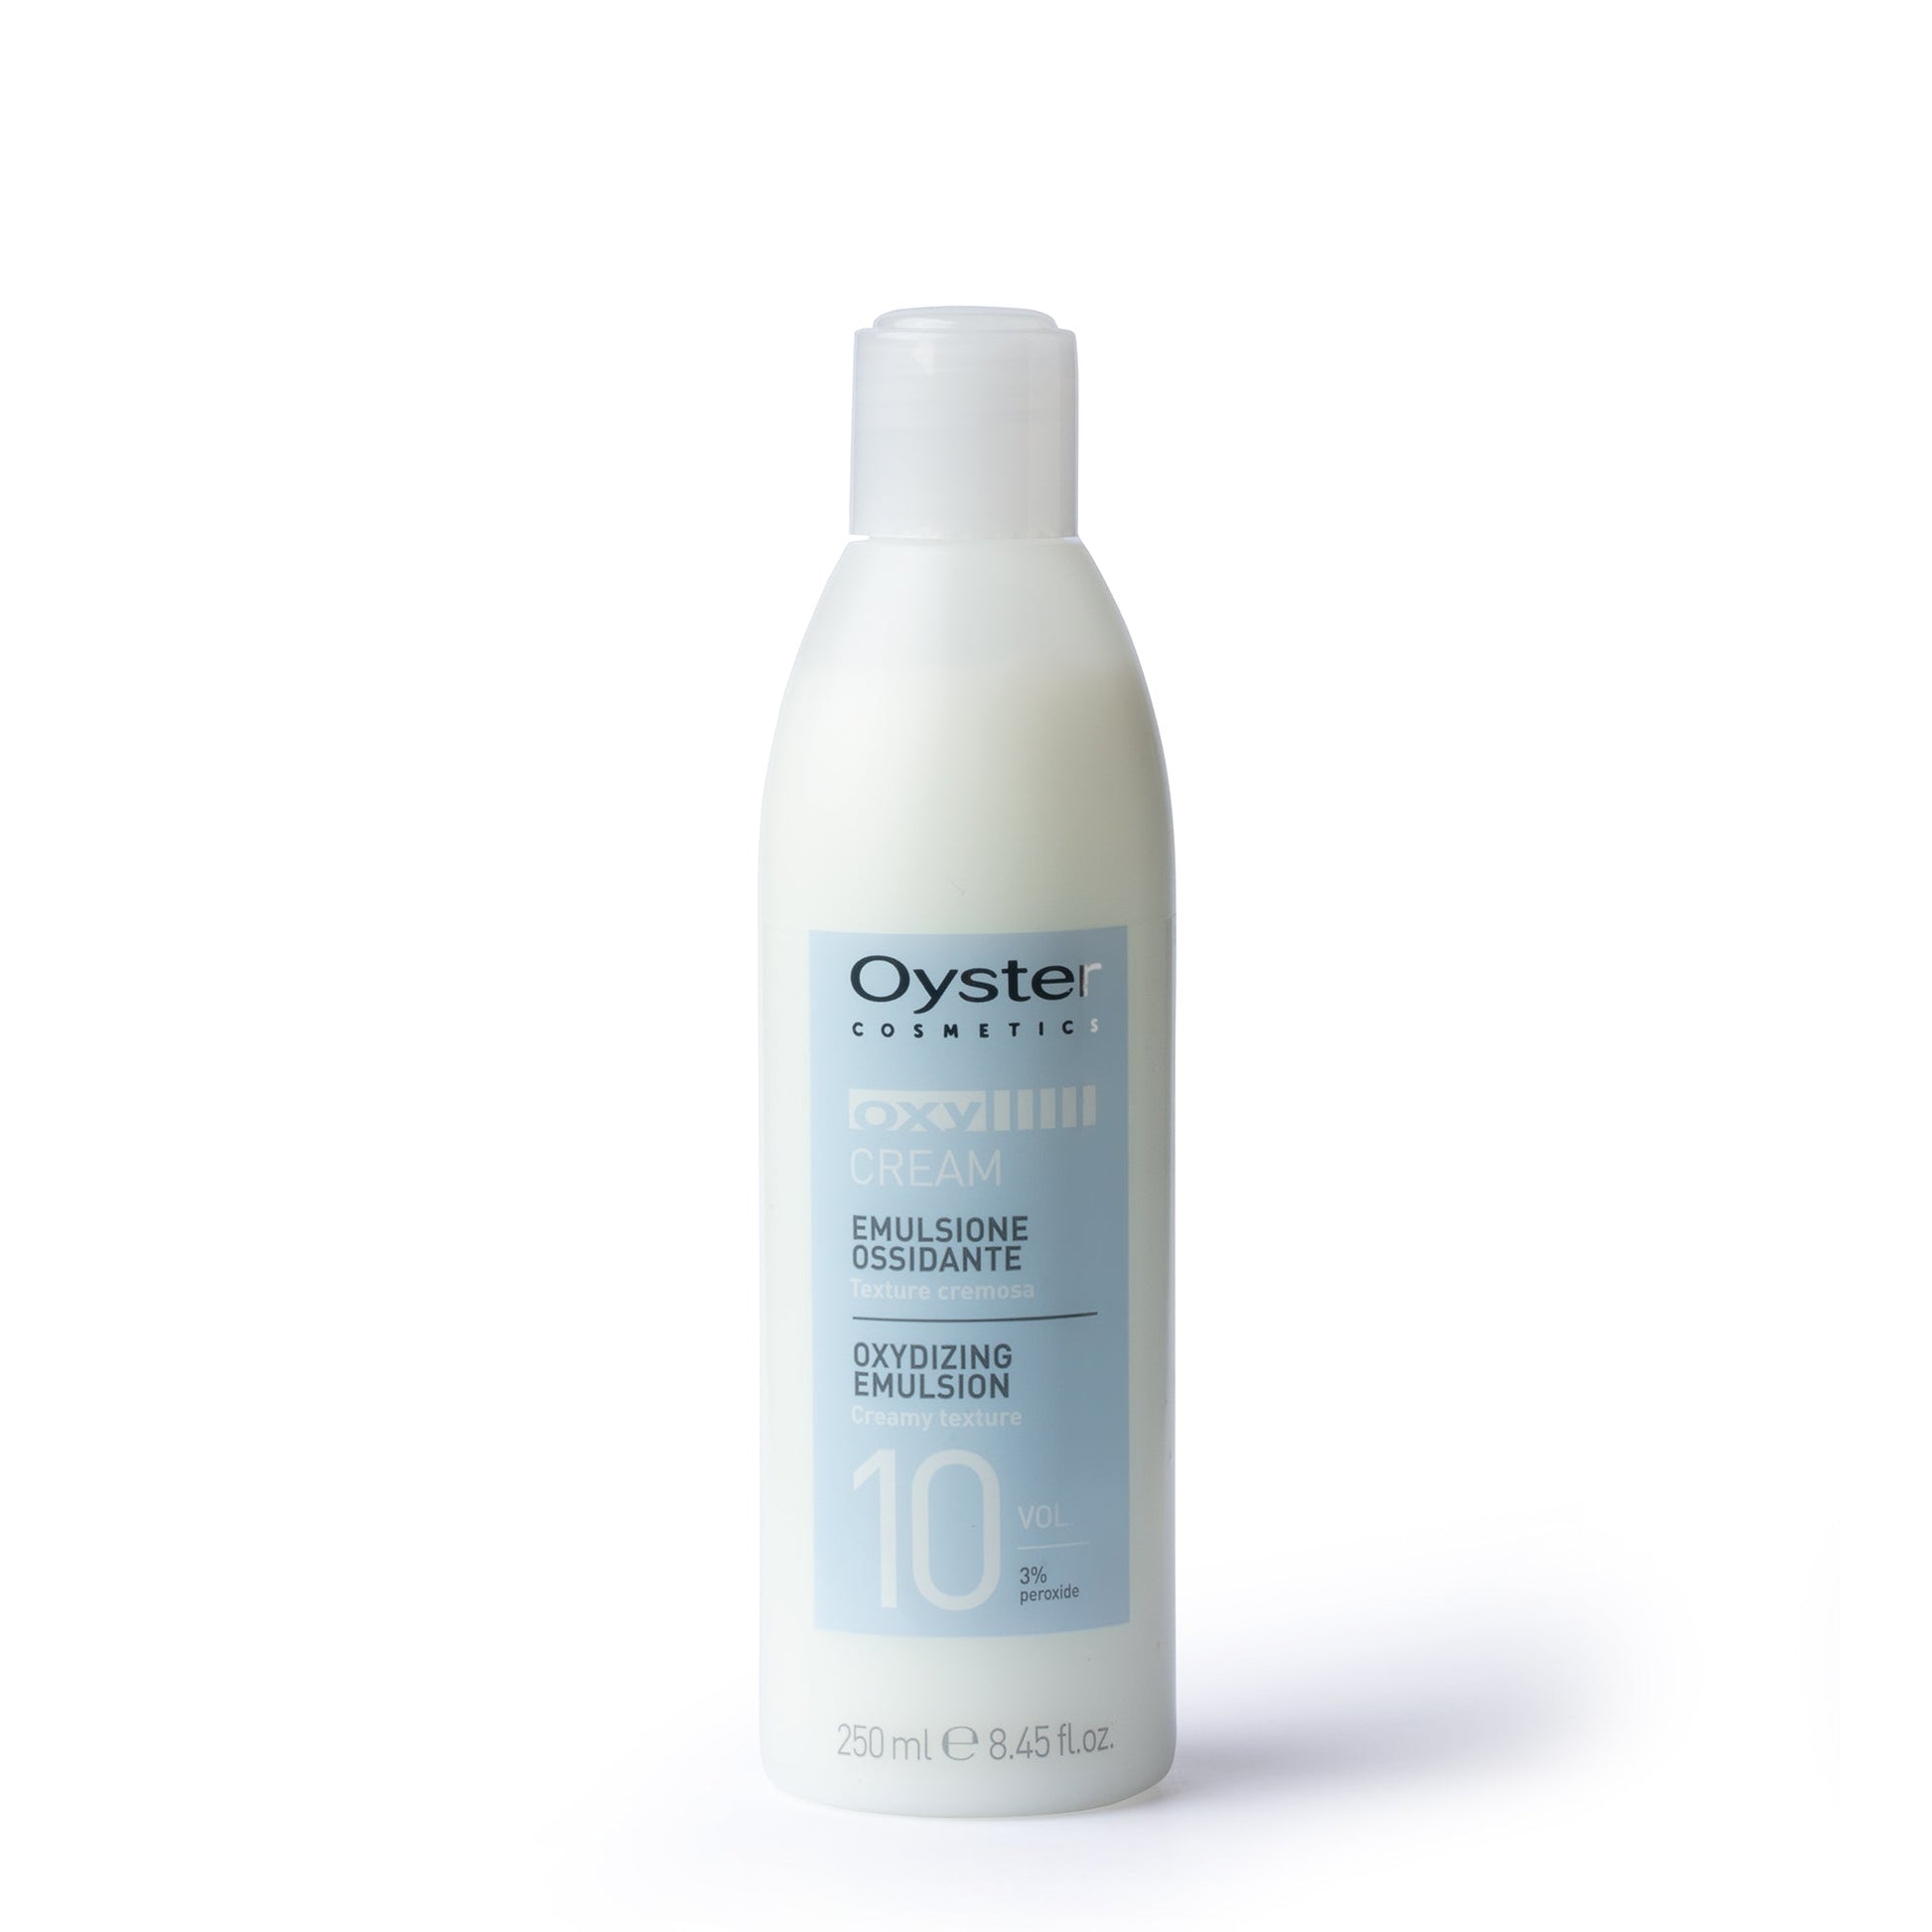 Oyster Oxy Cream Developer | 10 vol - 3% Peroxide | OYSTER - SH Salons